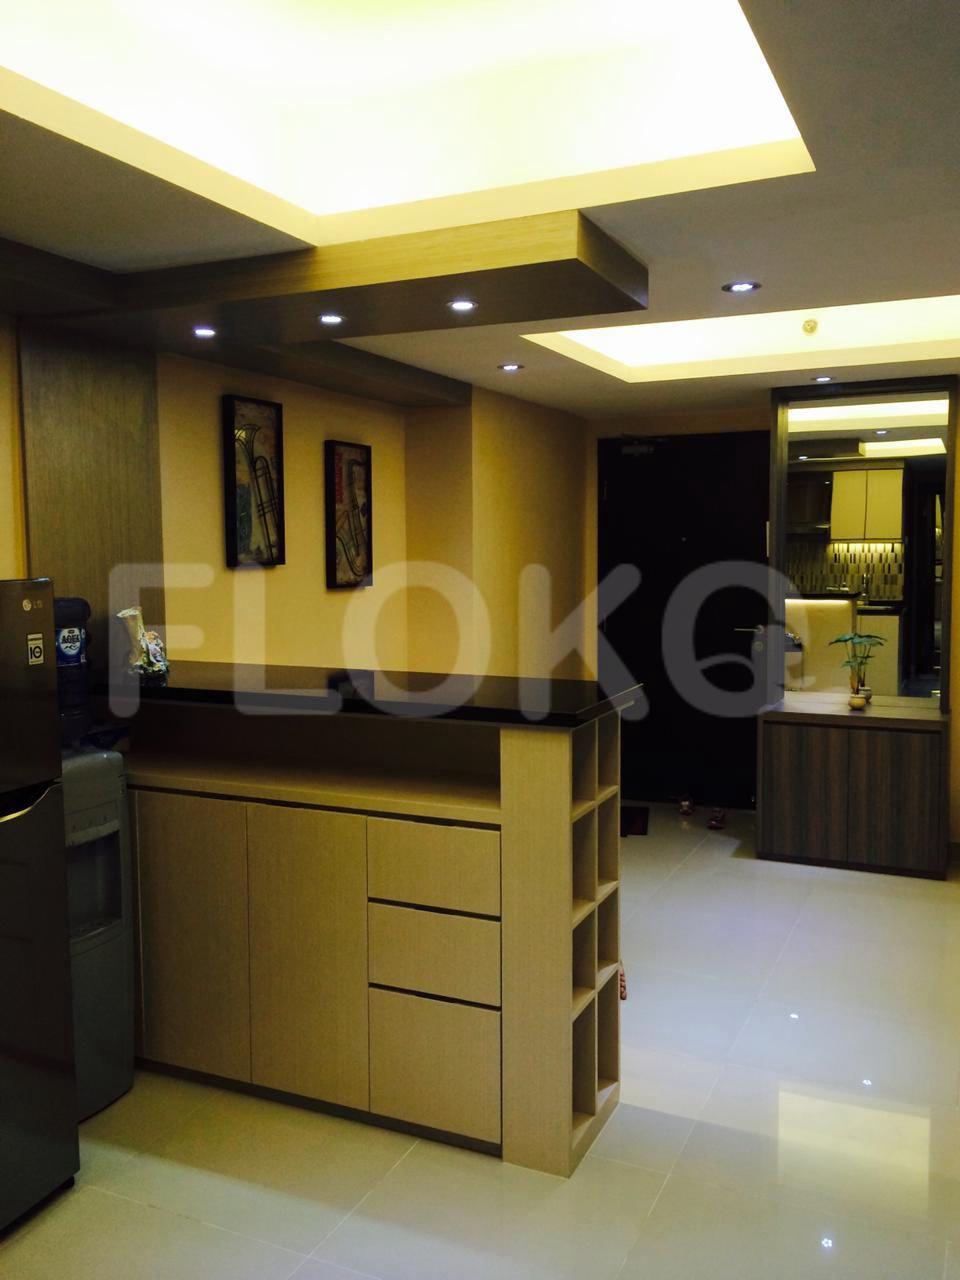 2 Bedroom on 9th Floor fku779 for Rent in The Wave Apartment